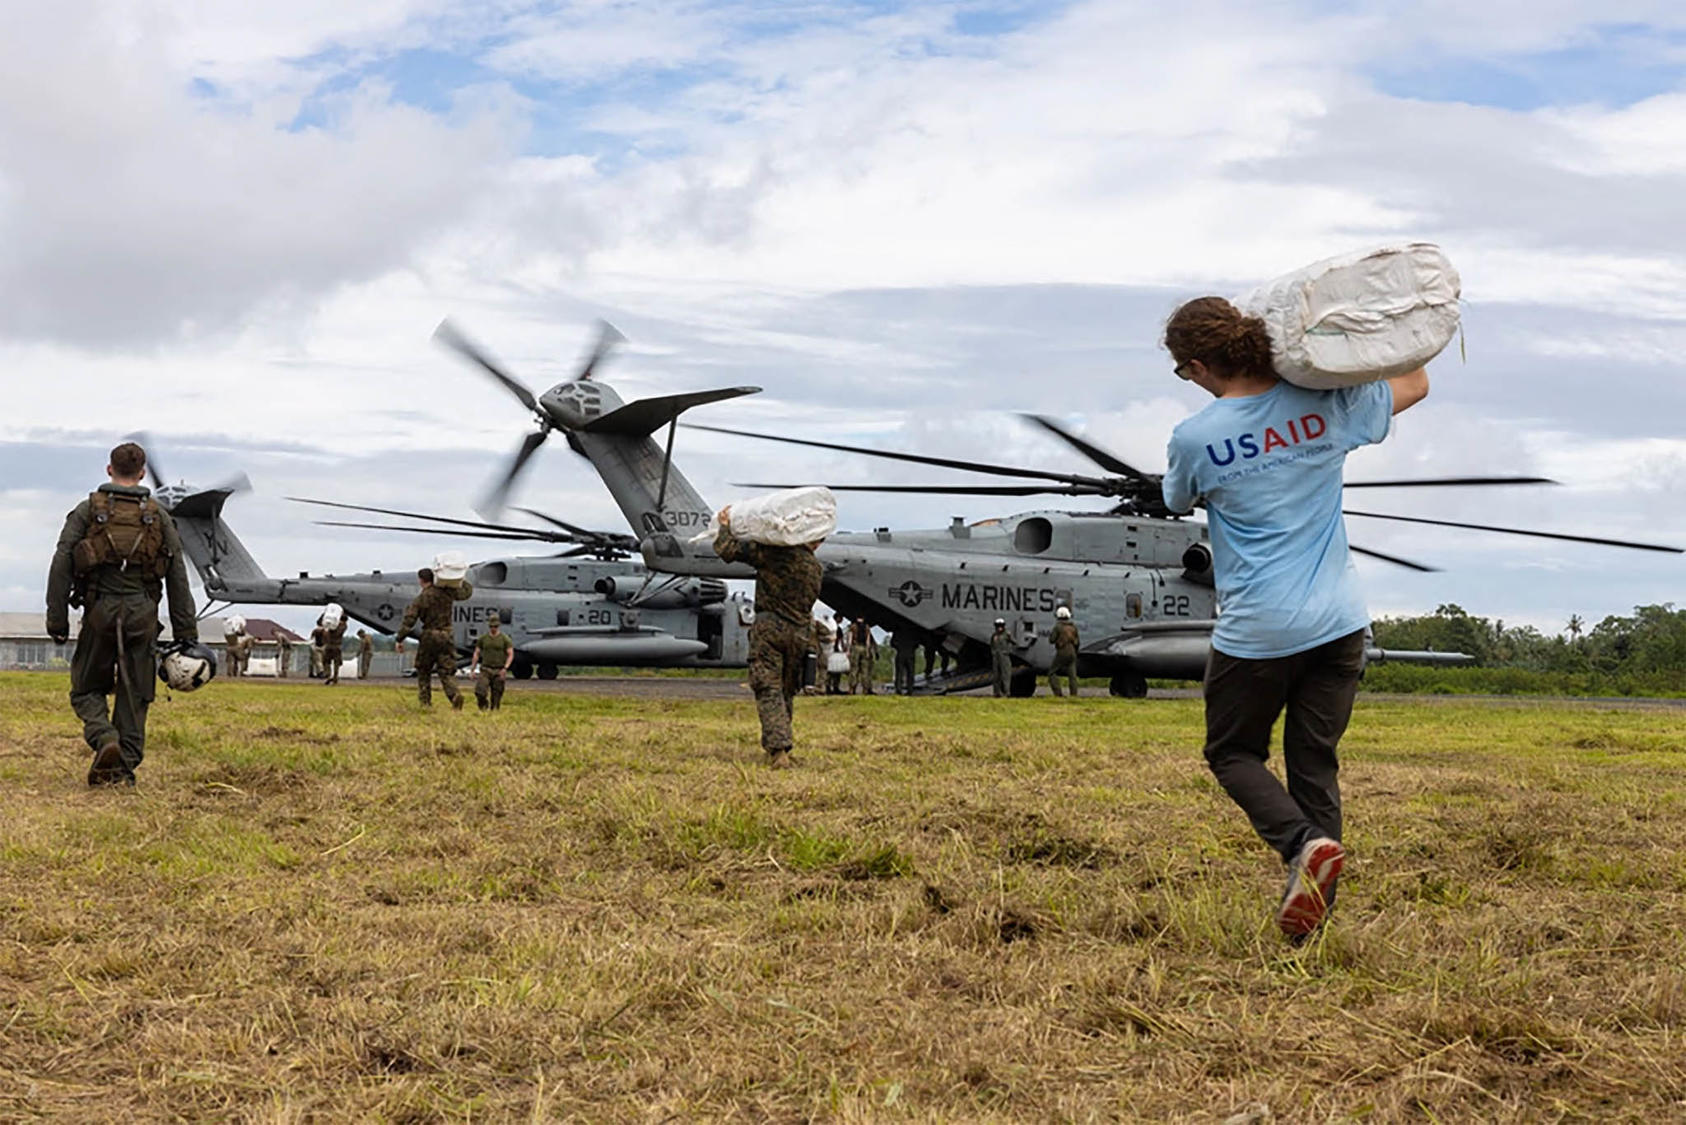 U.S. Marines and USAID workers load supplies onto aircraft during a humanitarian assistance and disaster relief operation in the Autonomous Region of Bougainville. August 13, 2023. (Lance Cpl. Bridgette Rodriguez/U.S. Marine Corps)